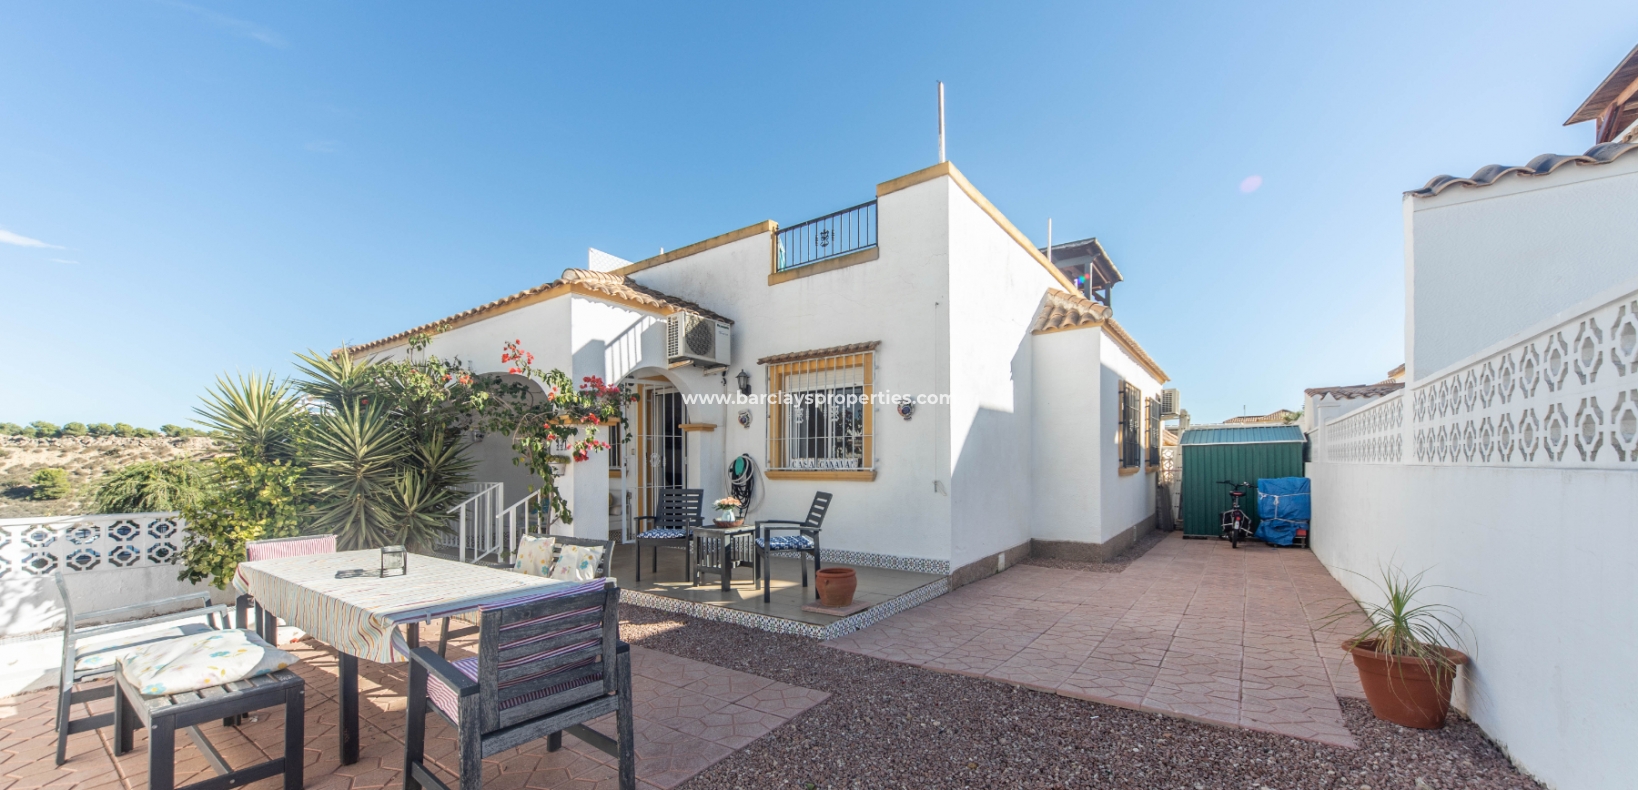 Quad Property for Sale in Costa Blanca